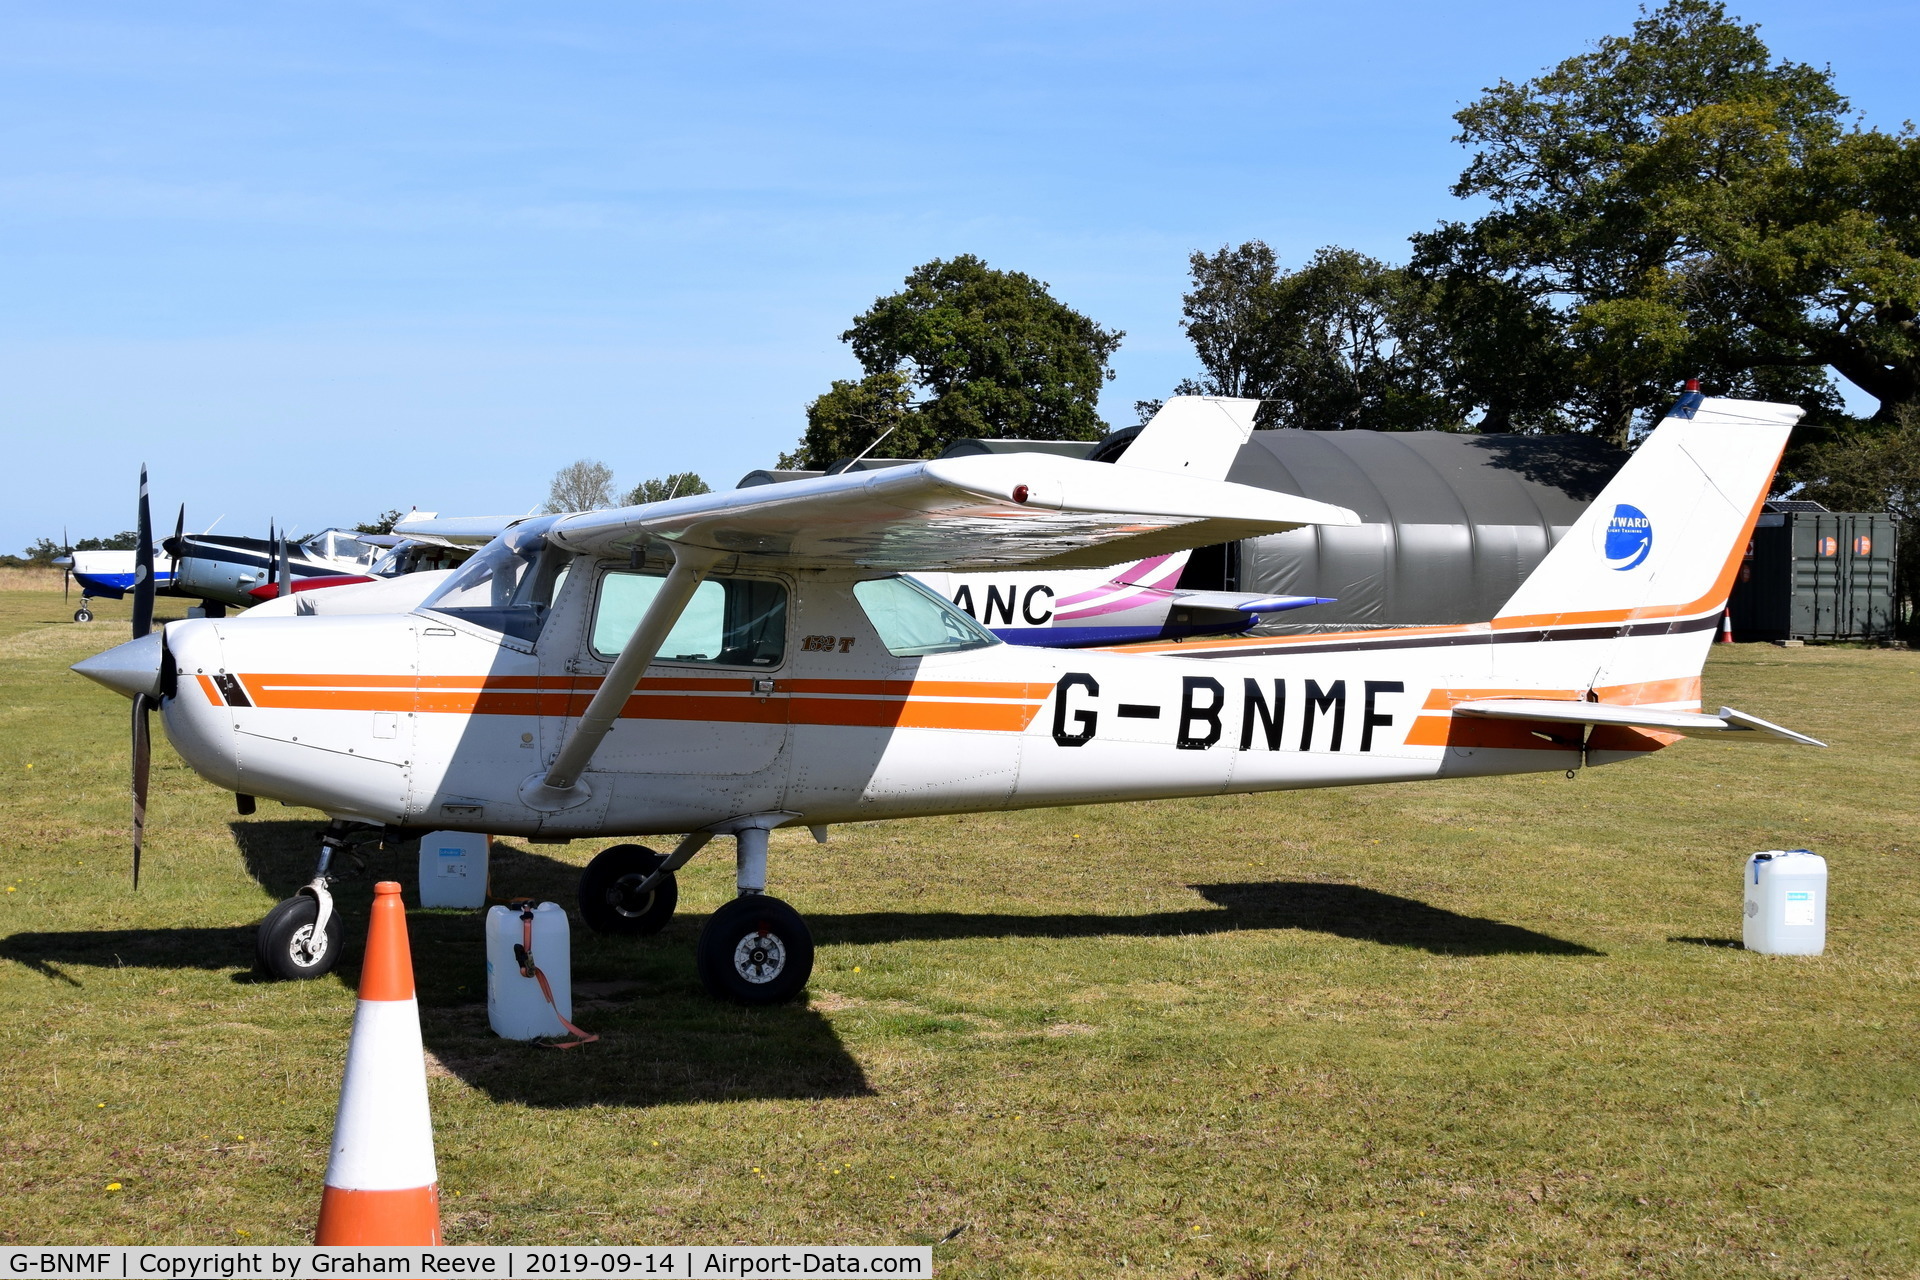 G-BNMF, 1982 Cessna 152 C/N 152-85563, Parked at, Bury St Edmunds, Rougham Airfield, UK.